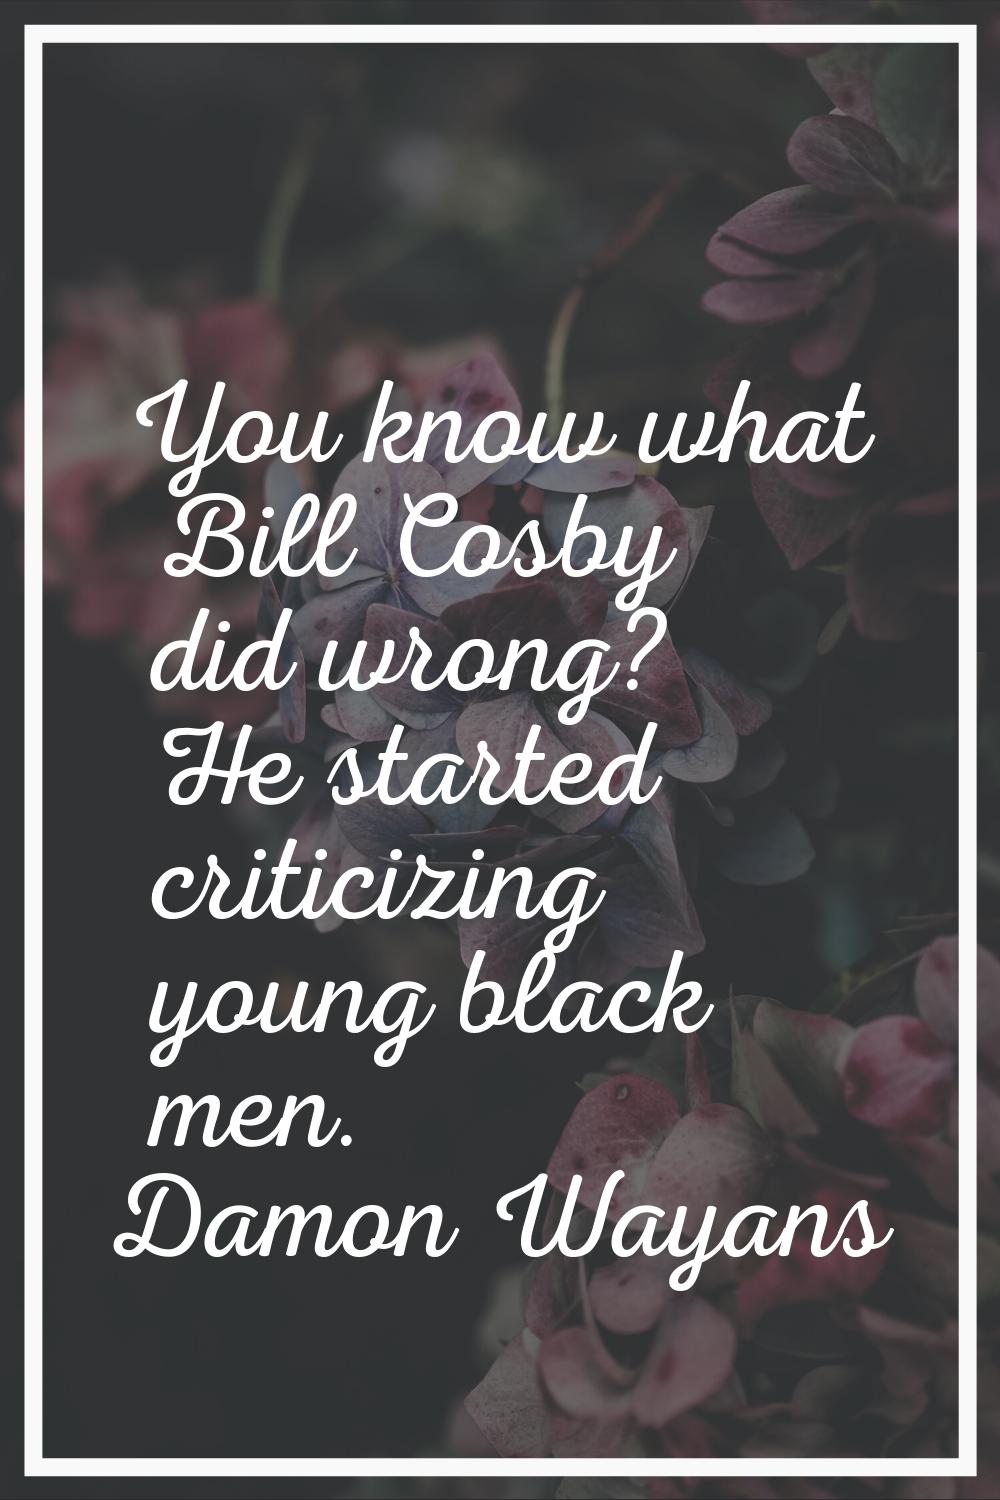 You know what Bill Cosby did wrong? He started criticizing young black men.